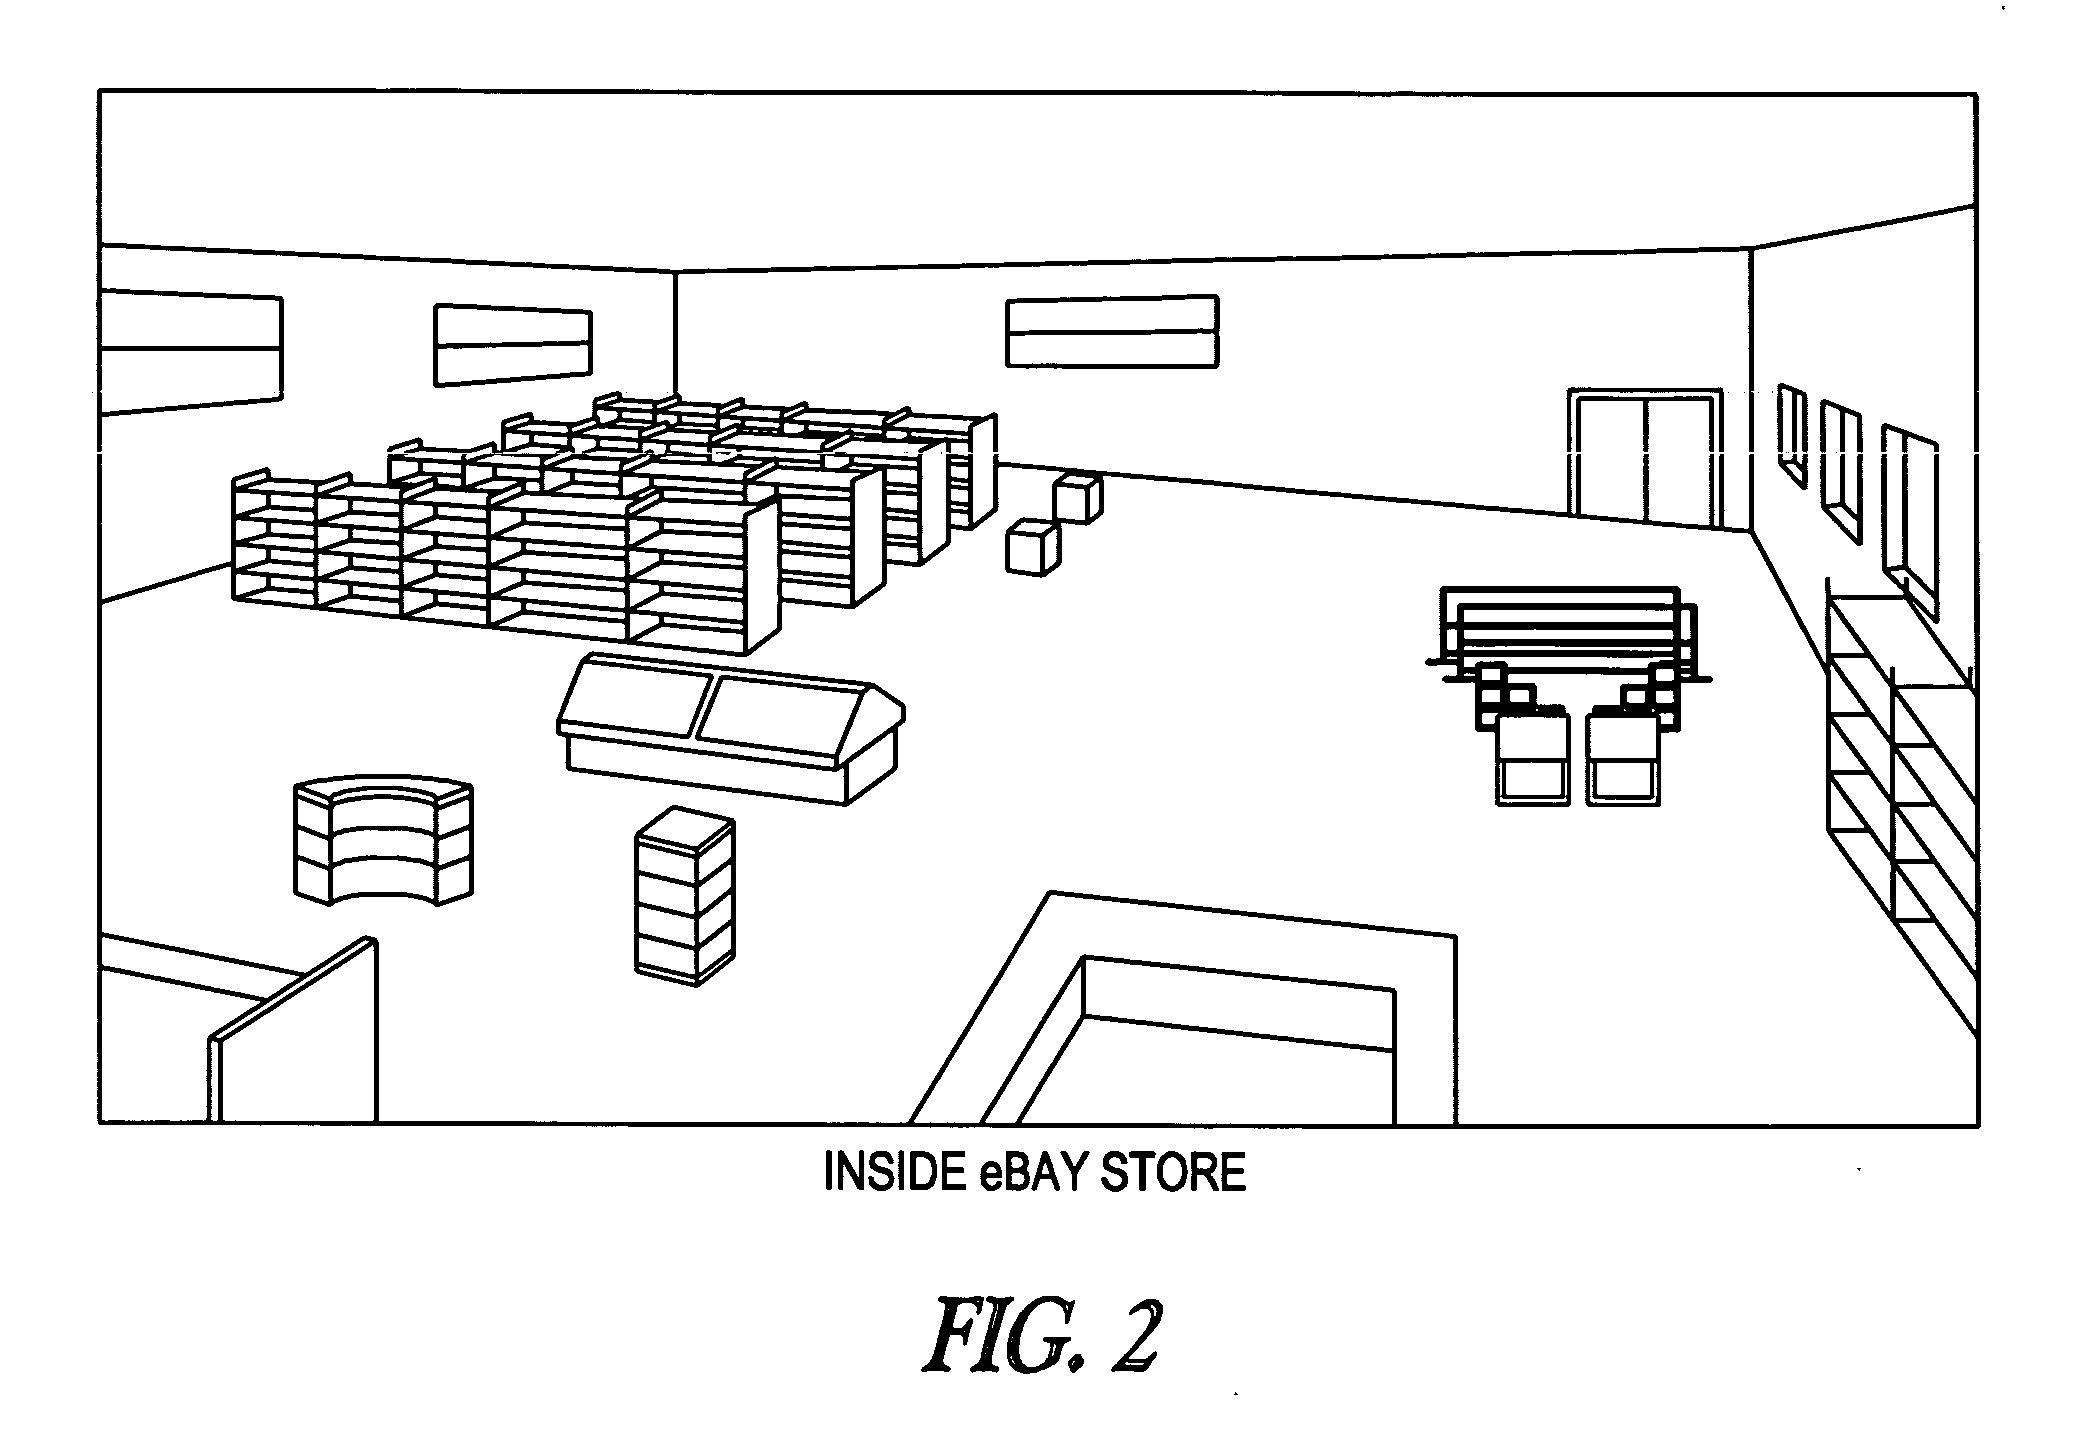 Virtual world system supporting a consumer experience